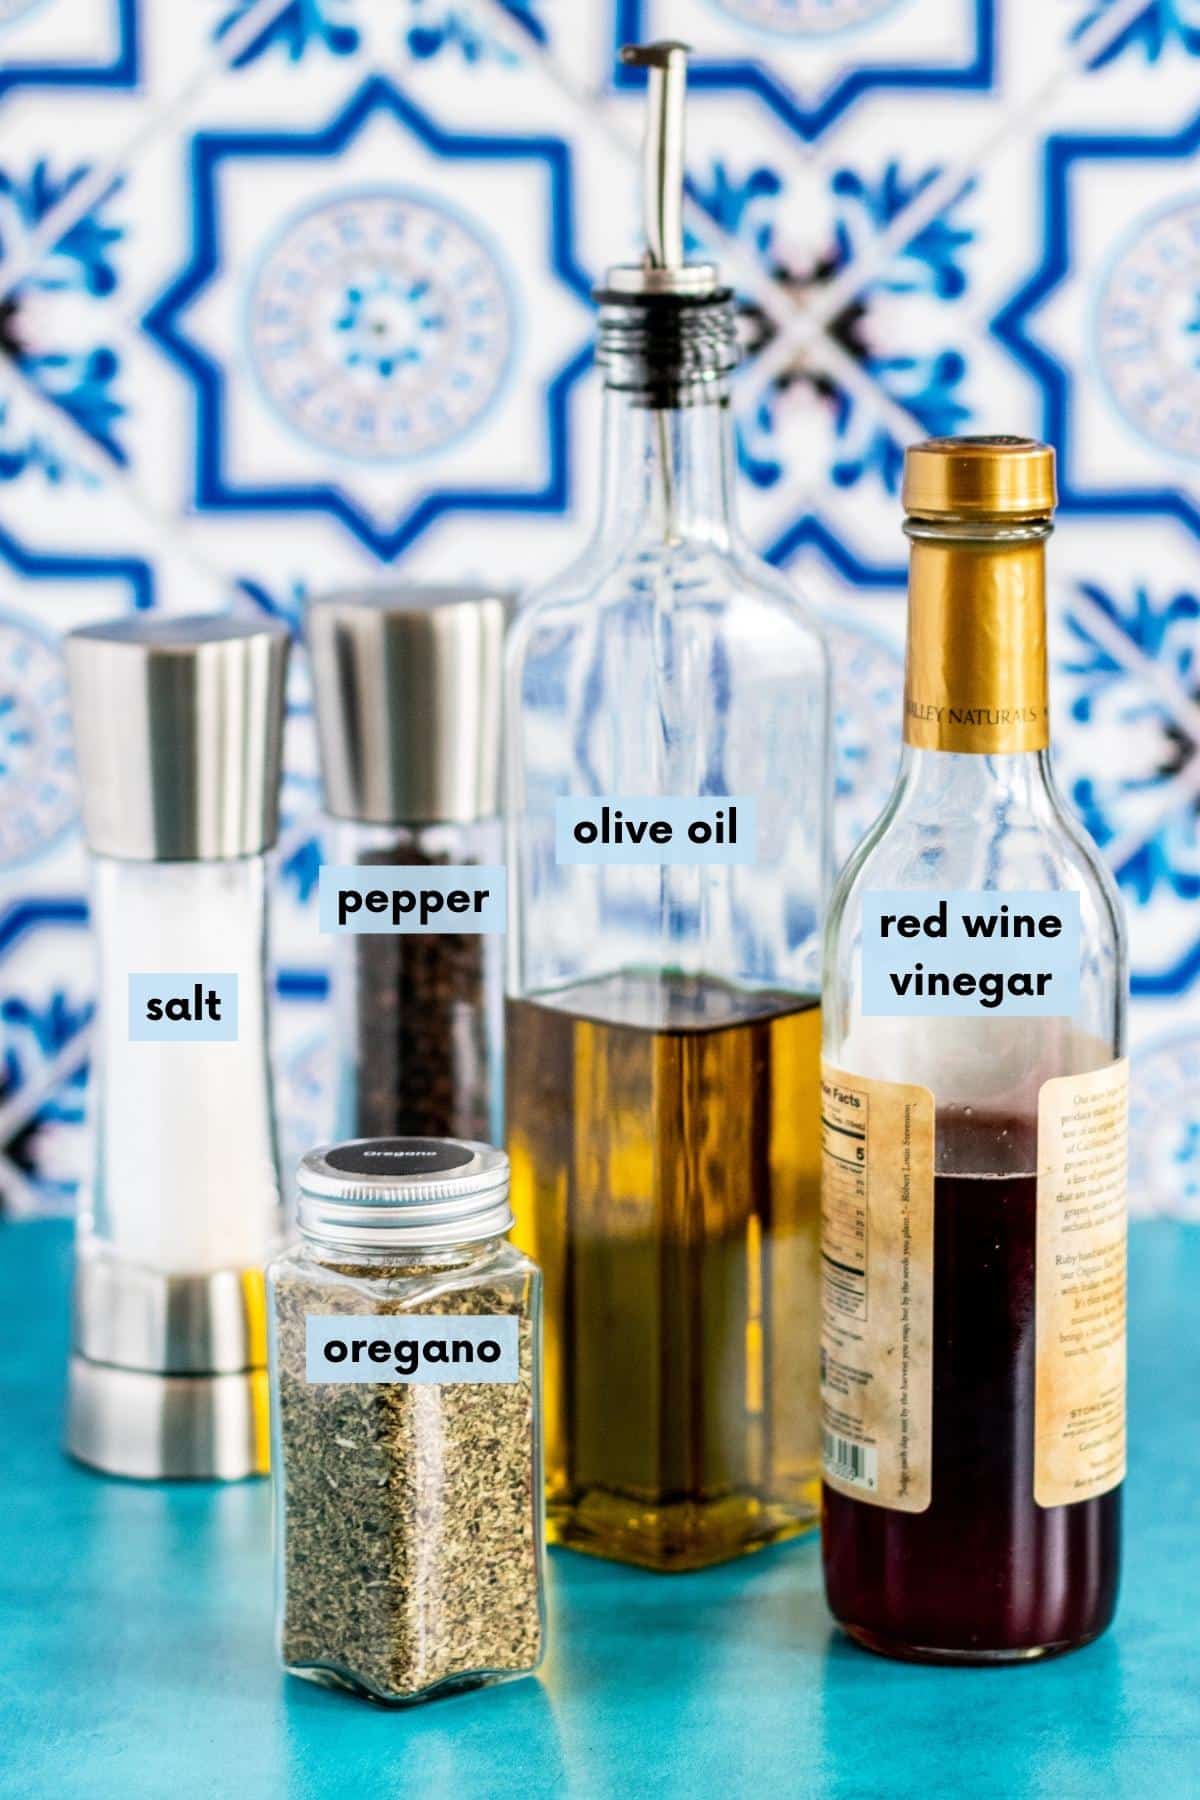 Jar of dried oregano, bottles of olive oil and red wine vinegar, and salt and pepper shakers.